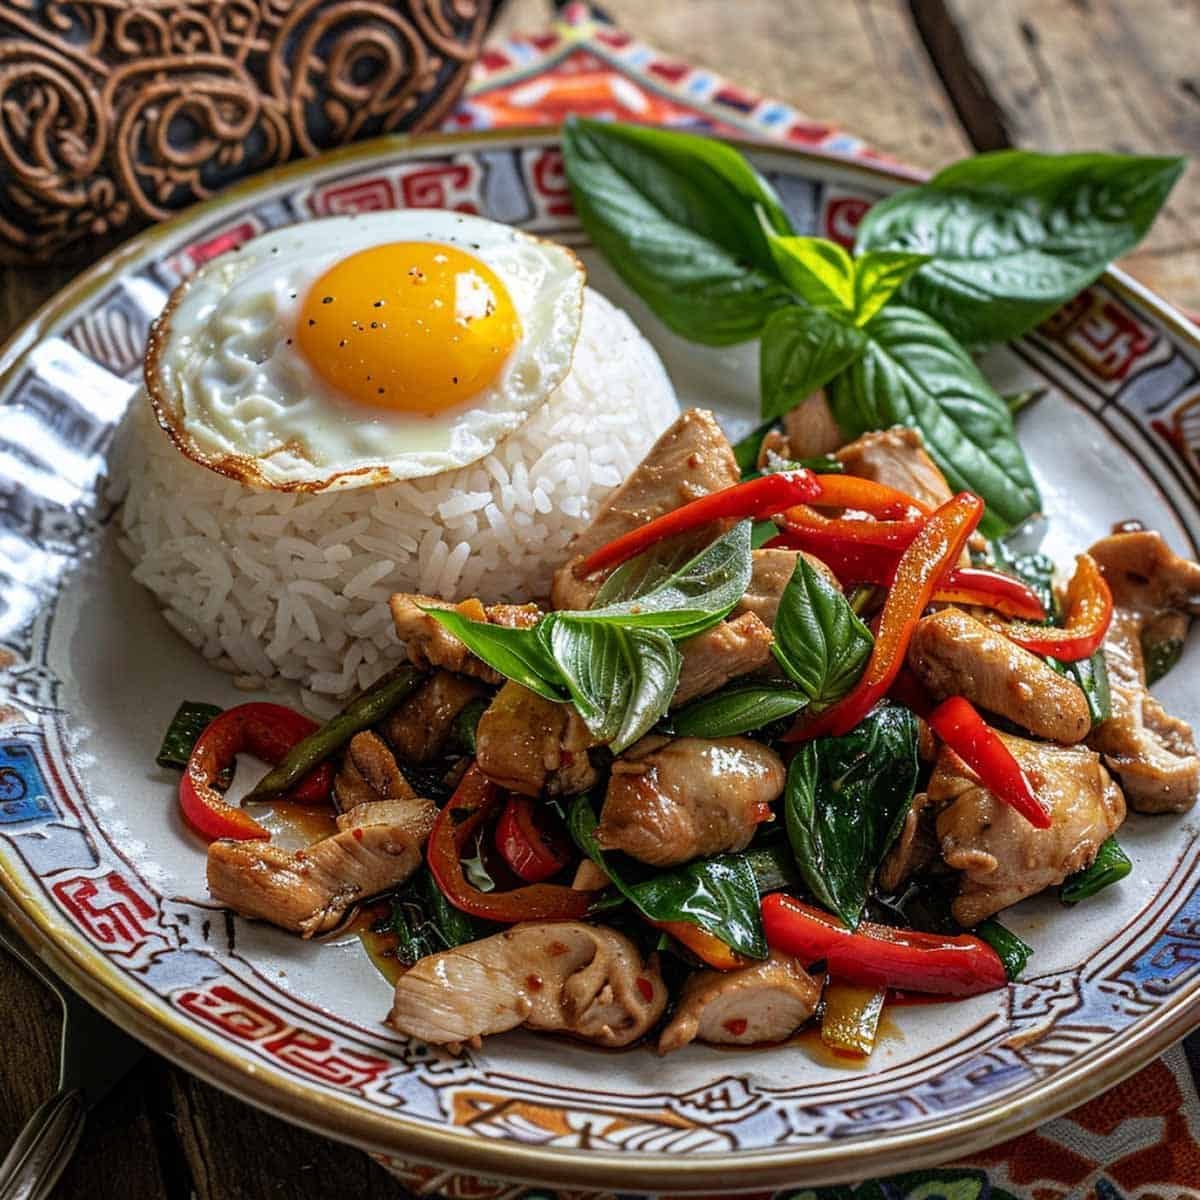 A finished plate of Thai Basil Chicken: stir-fried chicken with basil and chili over jasmine rice, topped with a fried egg